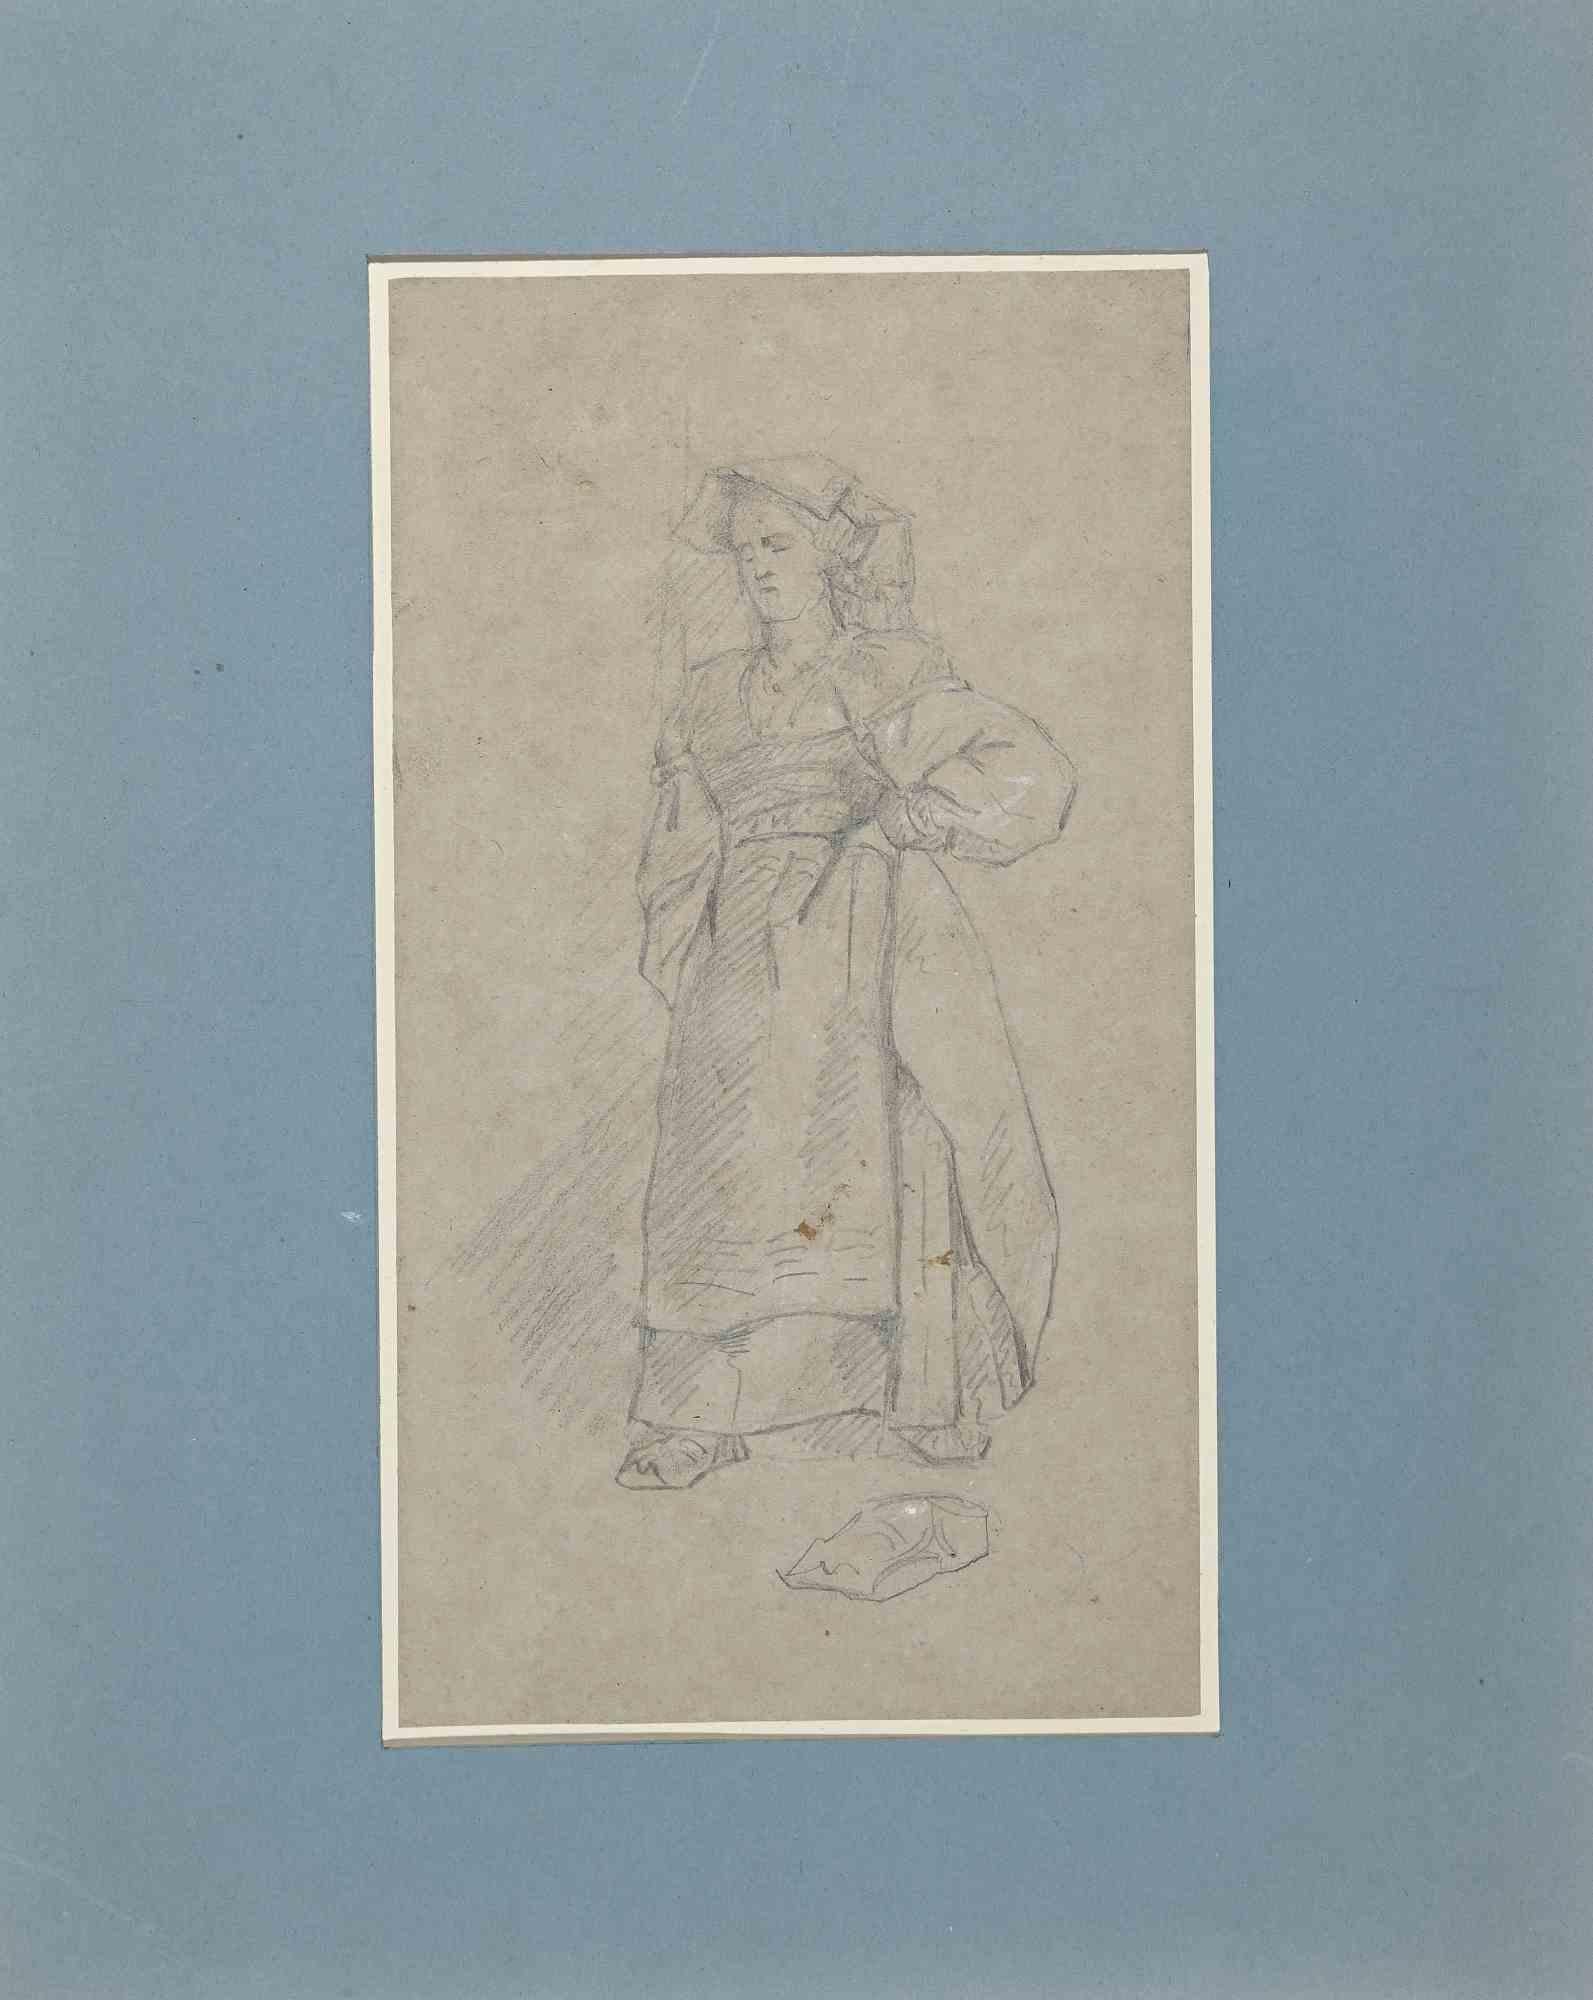 The Maidservant -  Original Drawing in Pencil by E. Giraud - Late 19th Century